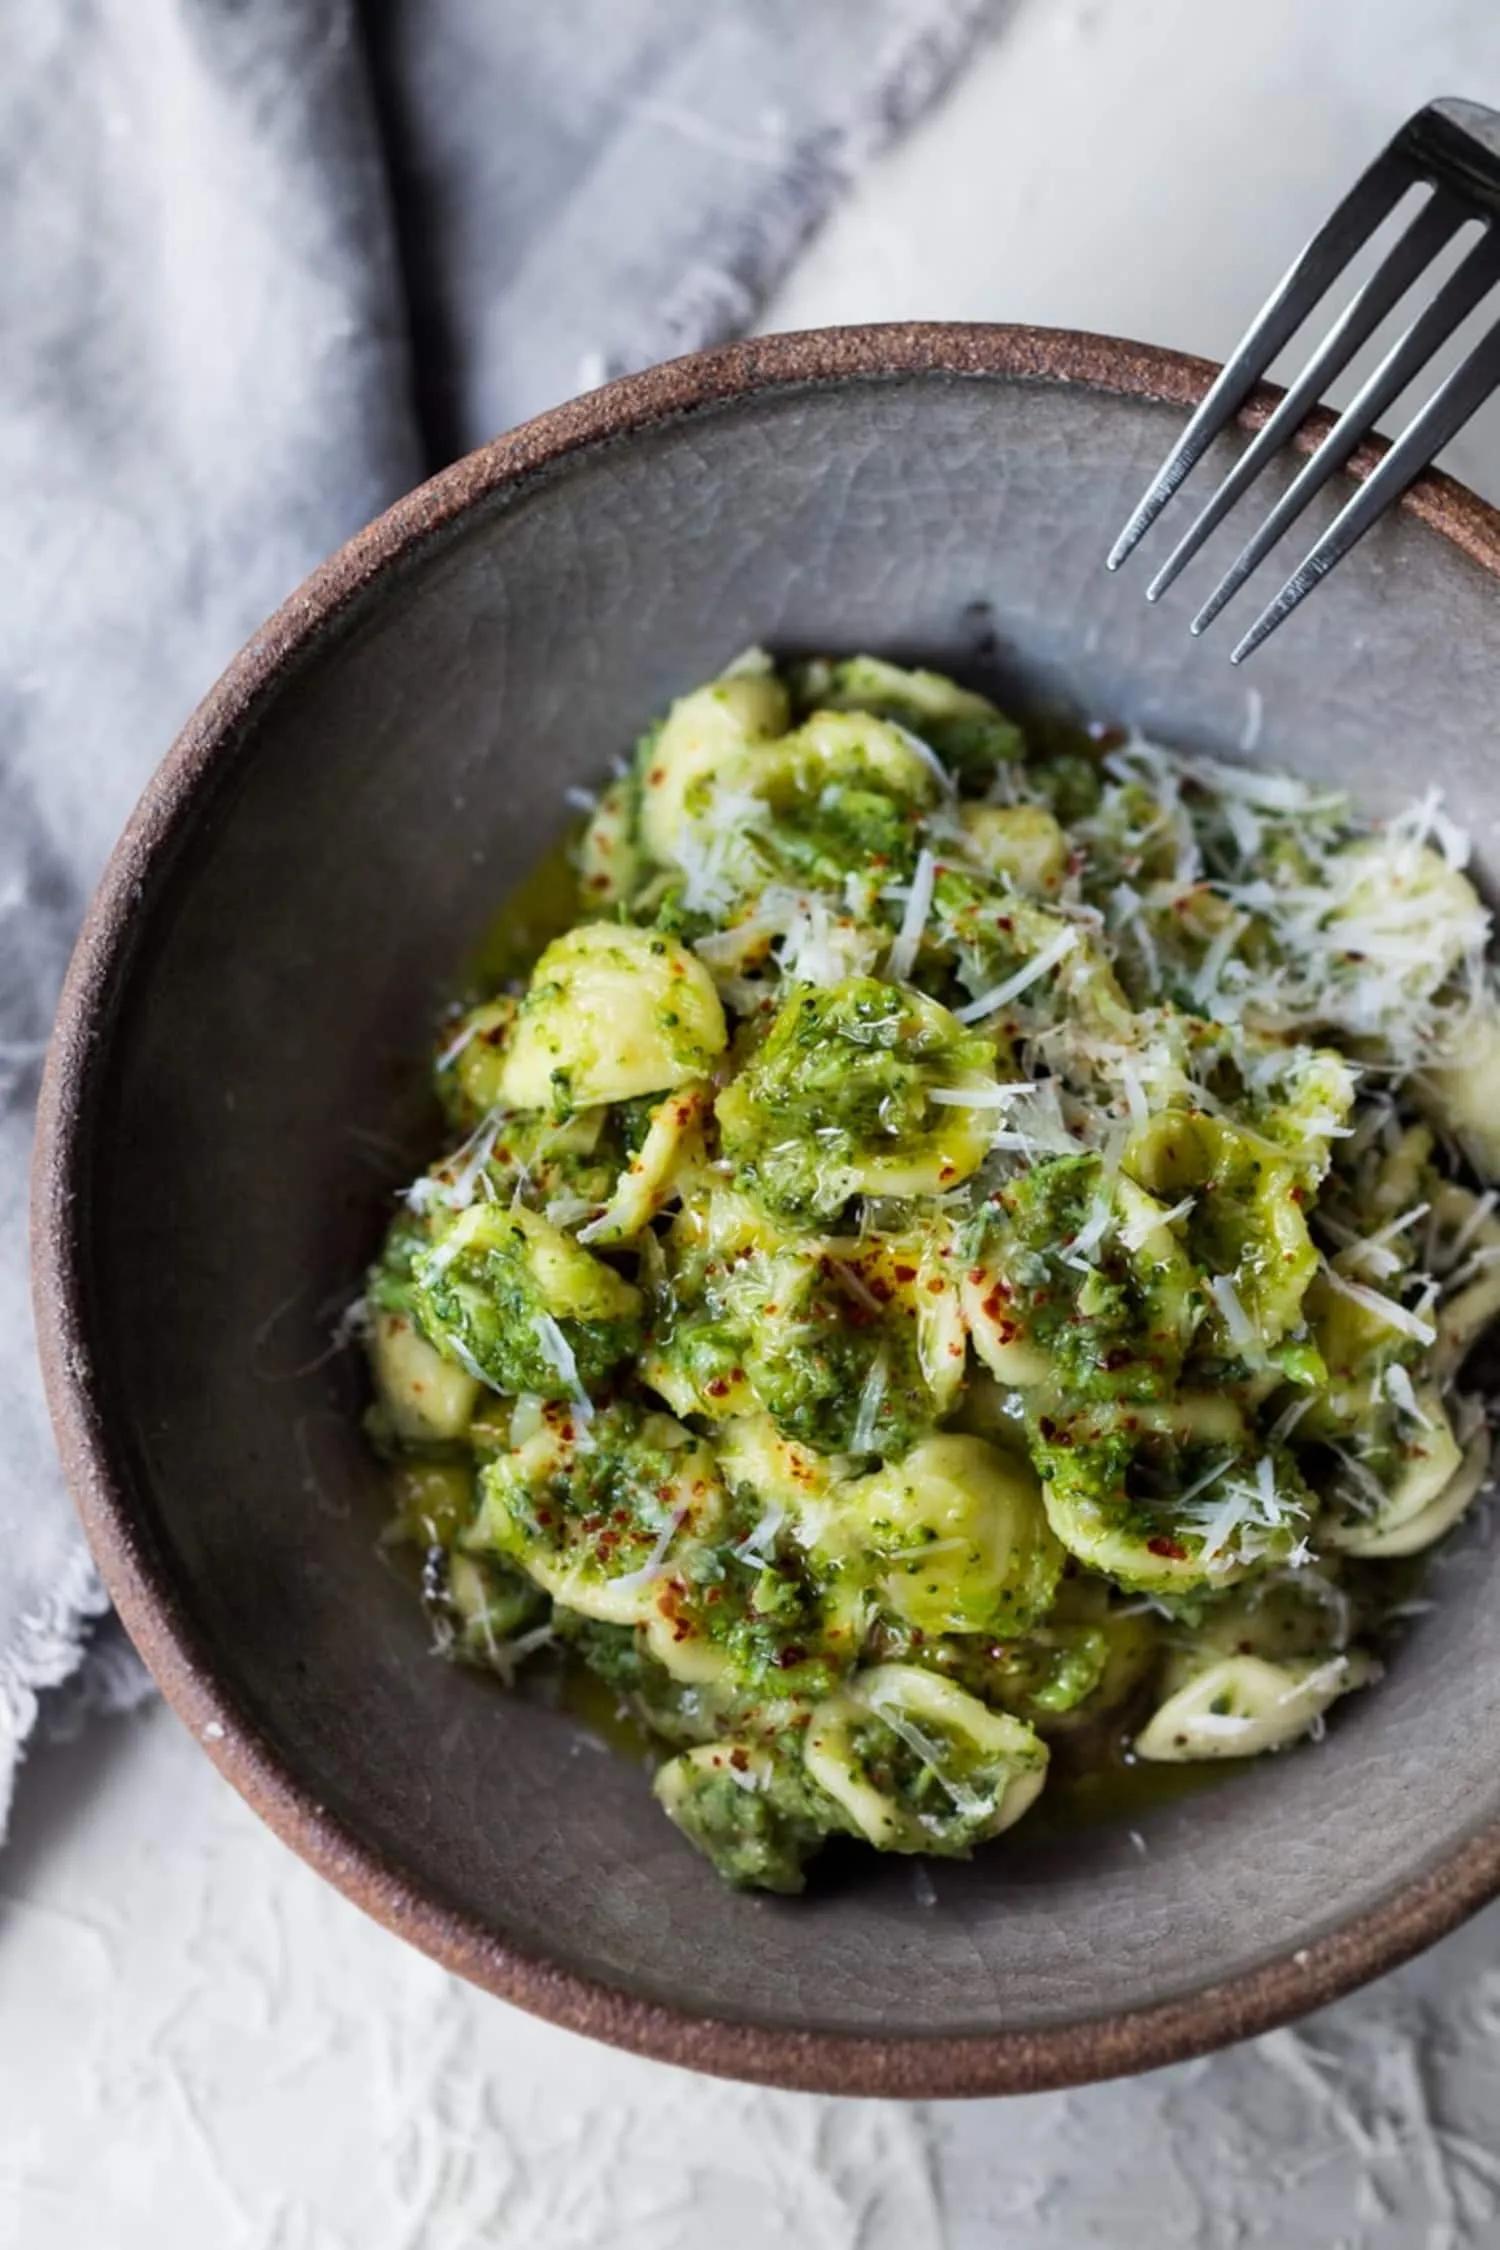 Broccoli Sauce Pasta Is the Best Way to Eat More Vegetables | Kitchn